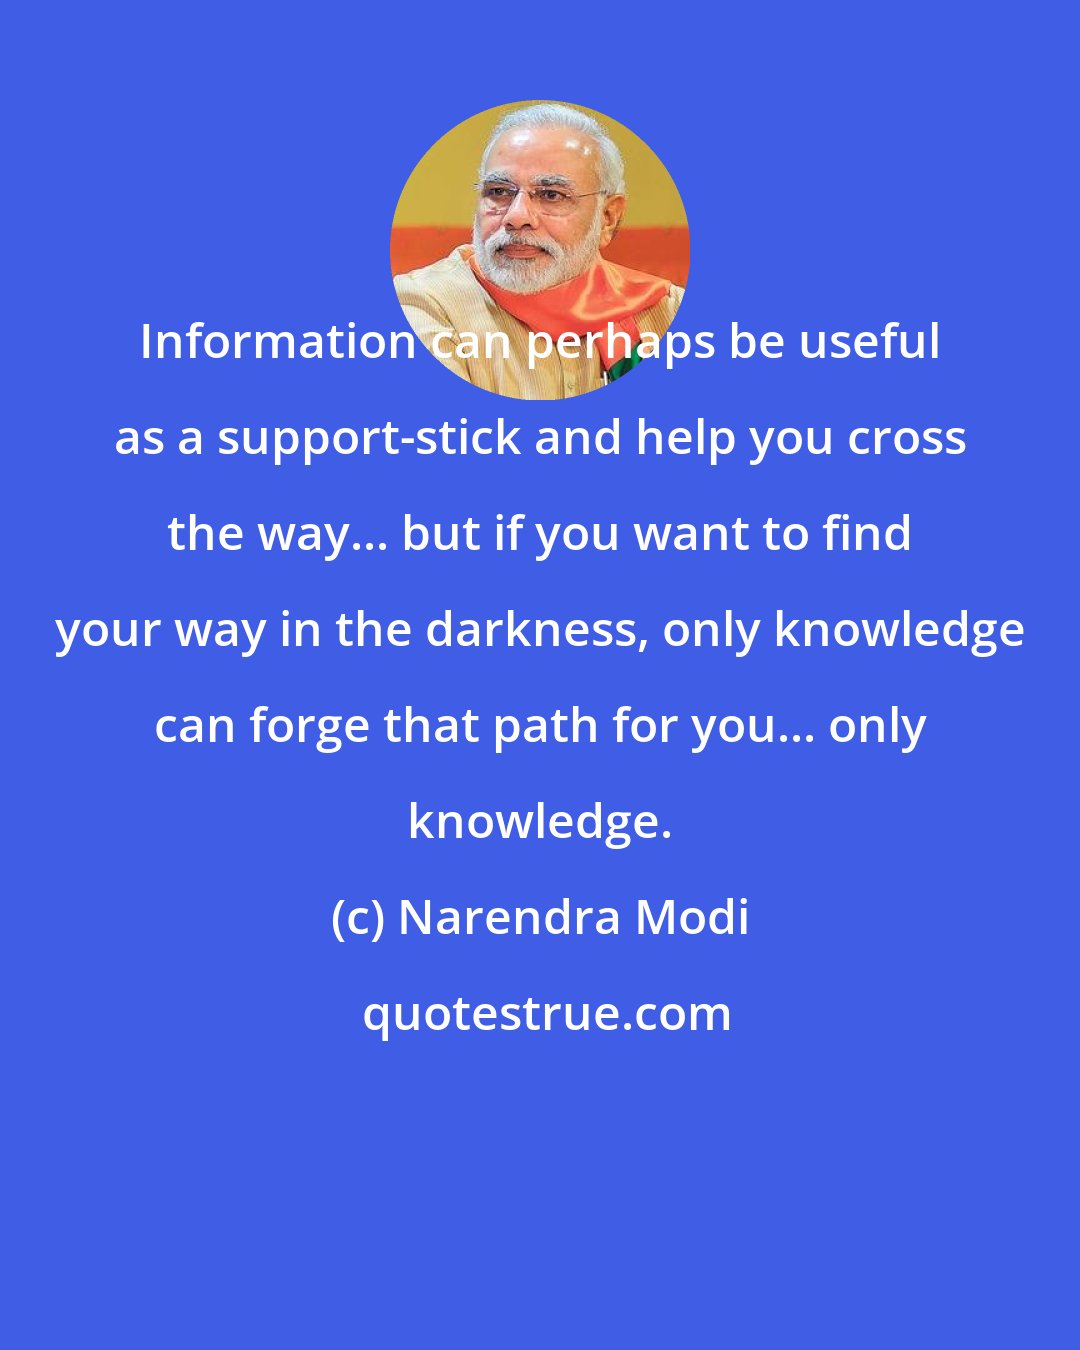 Narendra Modi: Information can perhaps be useful as a support-stick and help you cross the way... but if you want to find your way in the darkness, only knowledge can forge that path for you... only knowledge.